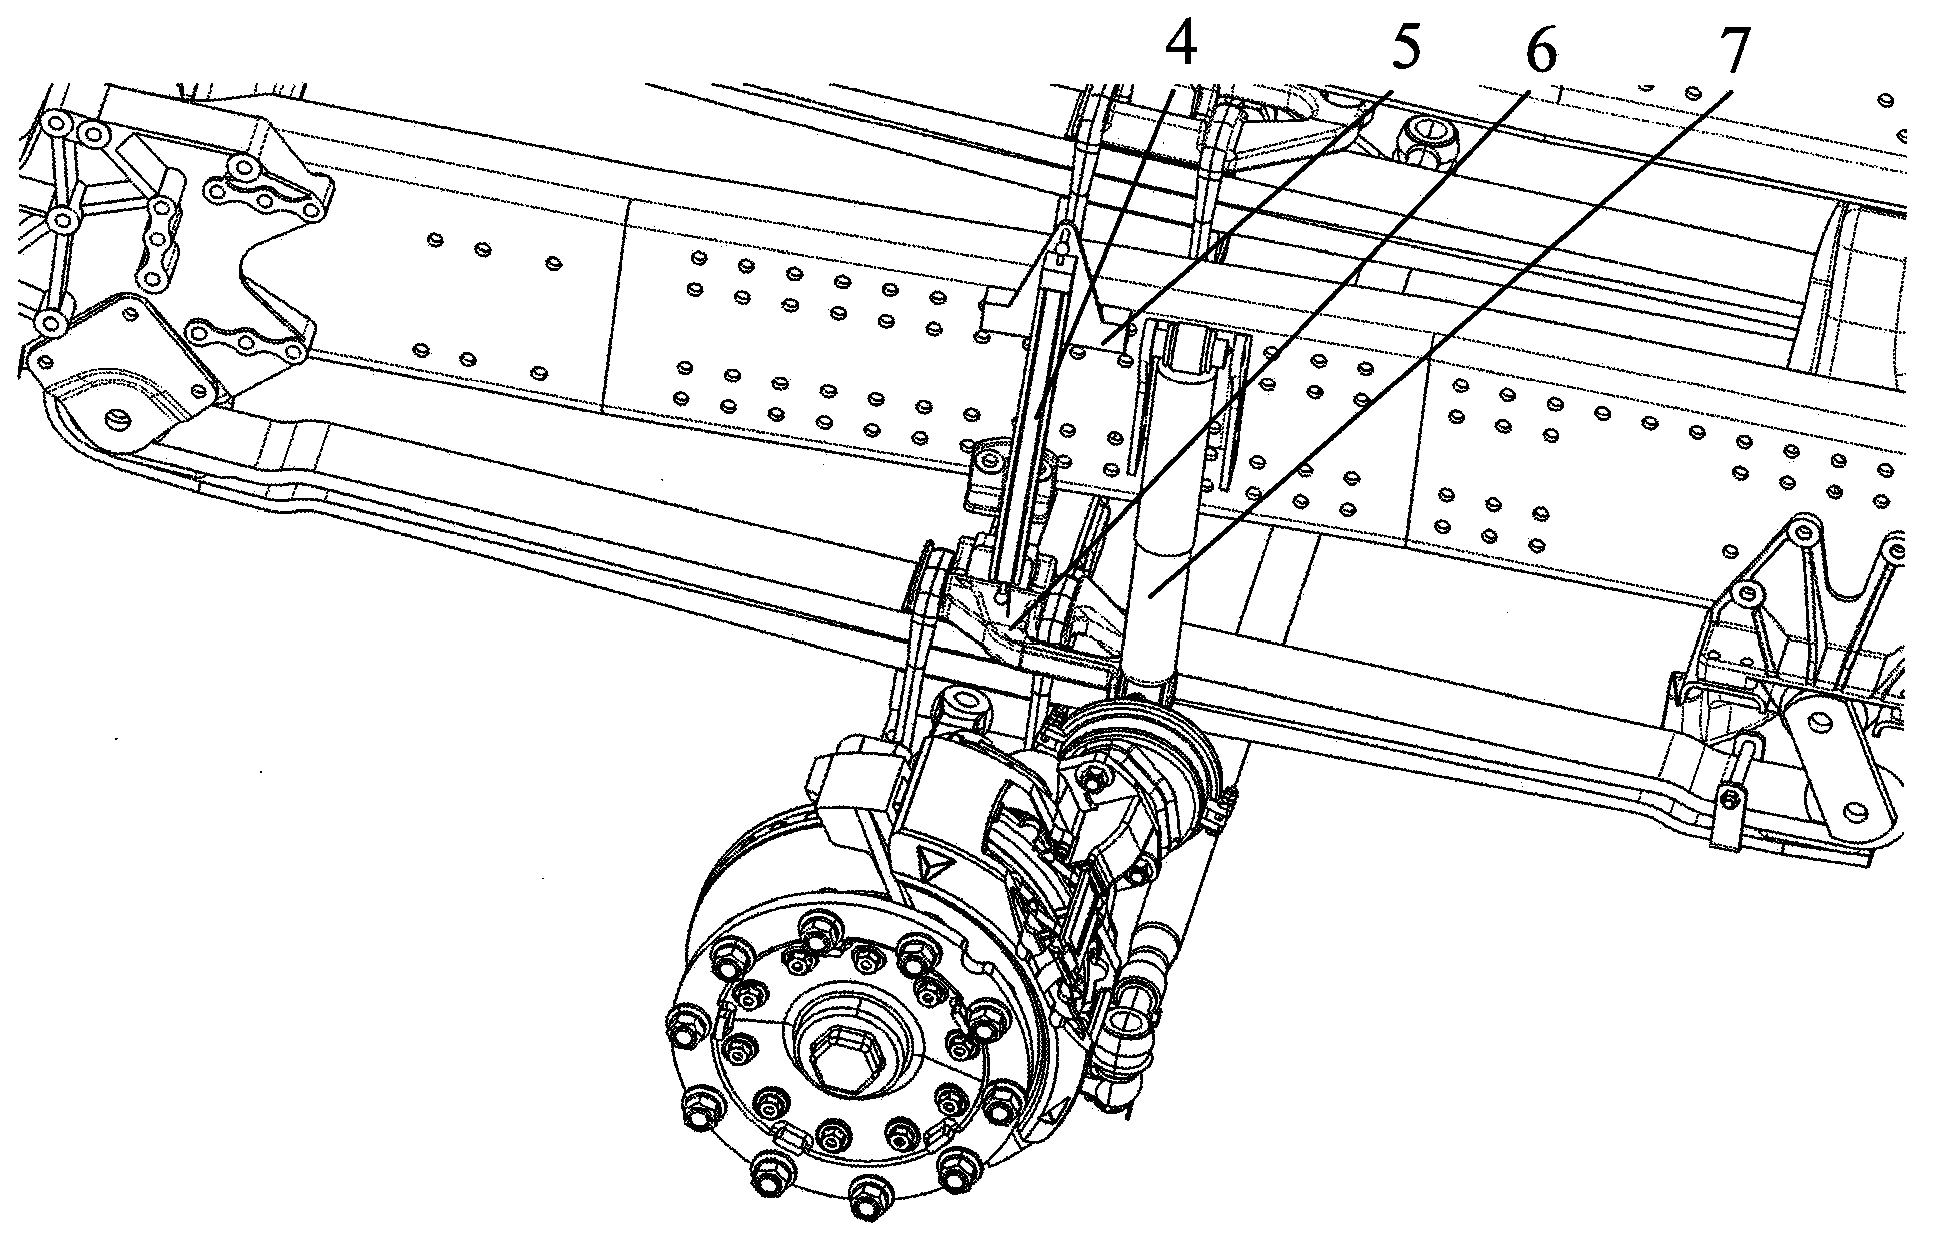 Plate spring suspension vehicle self-weighing system